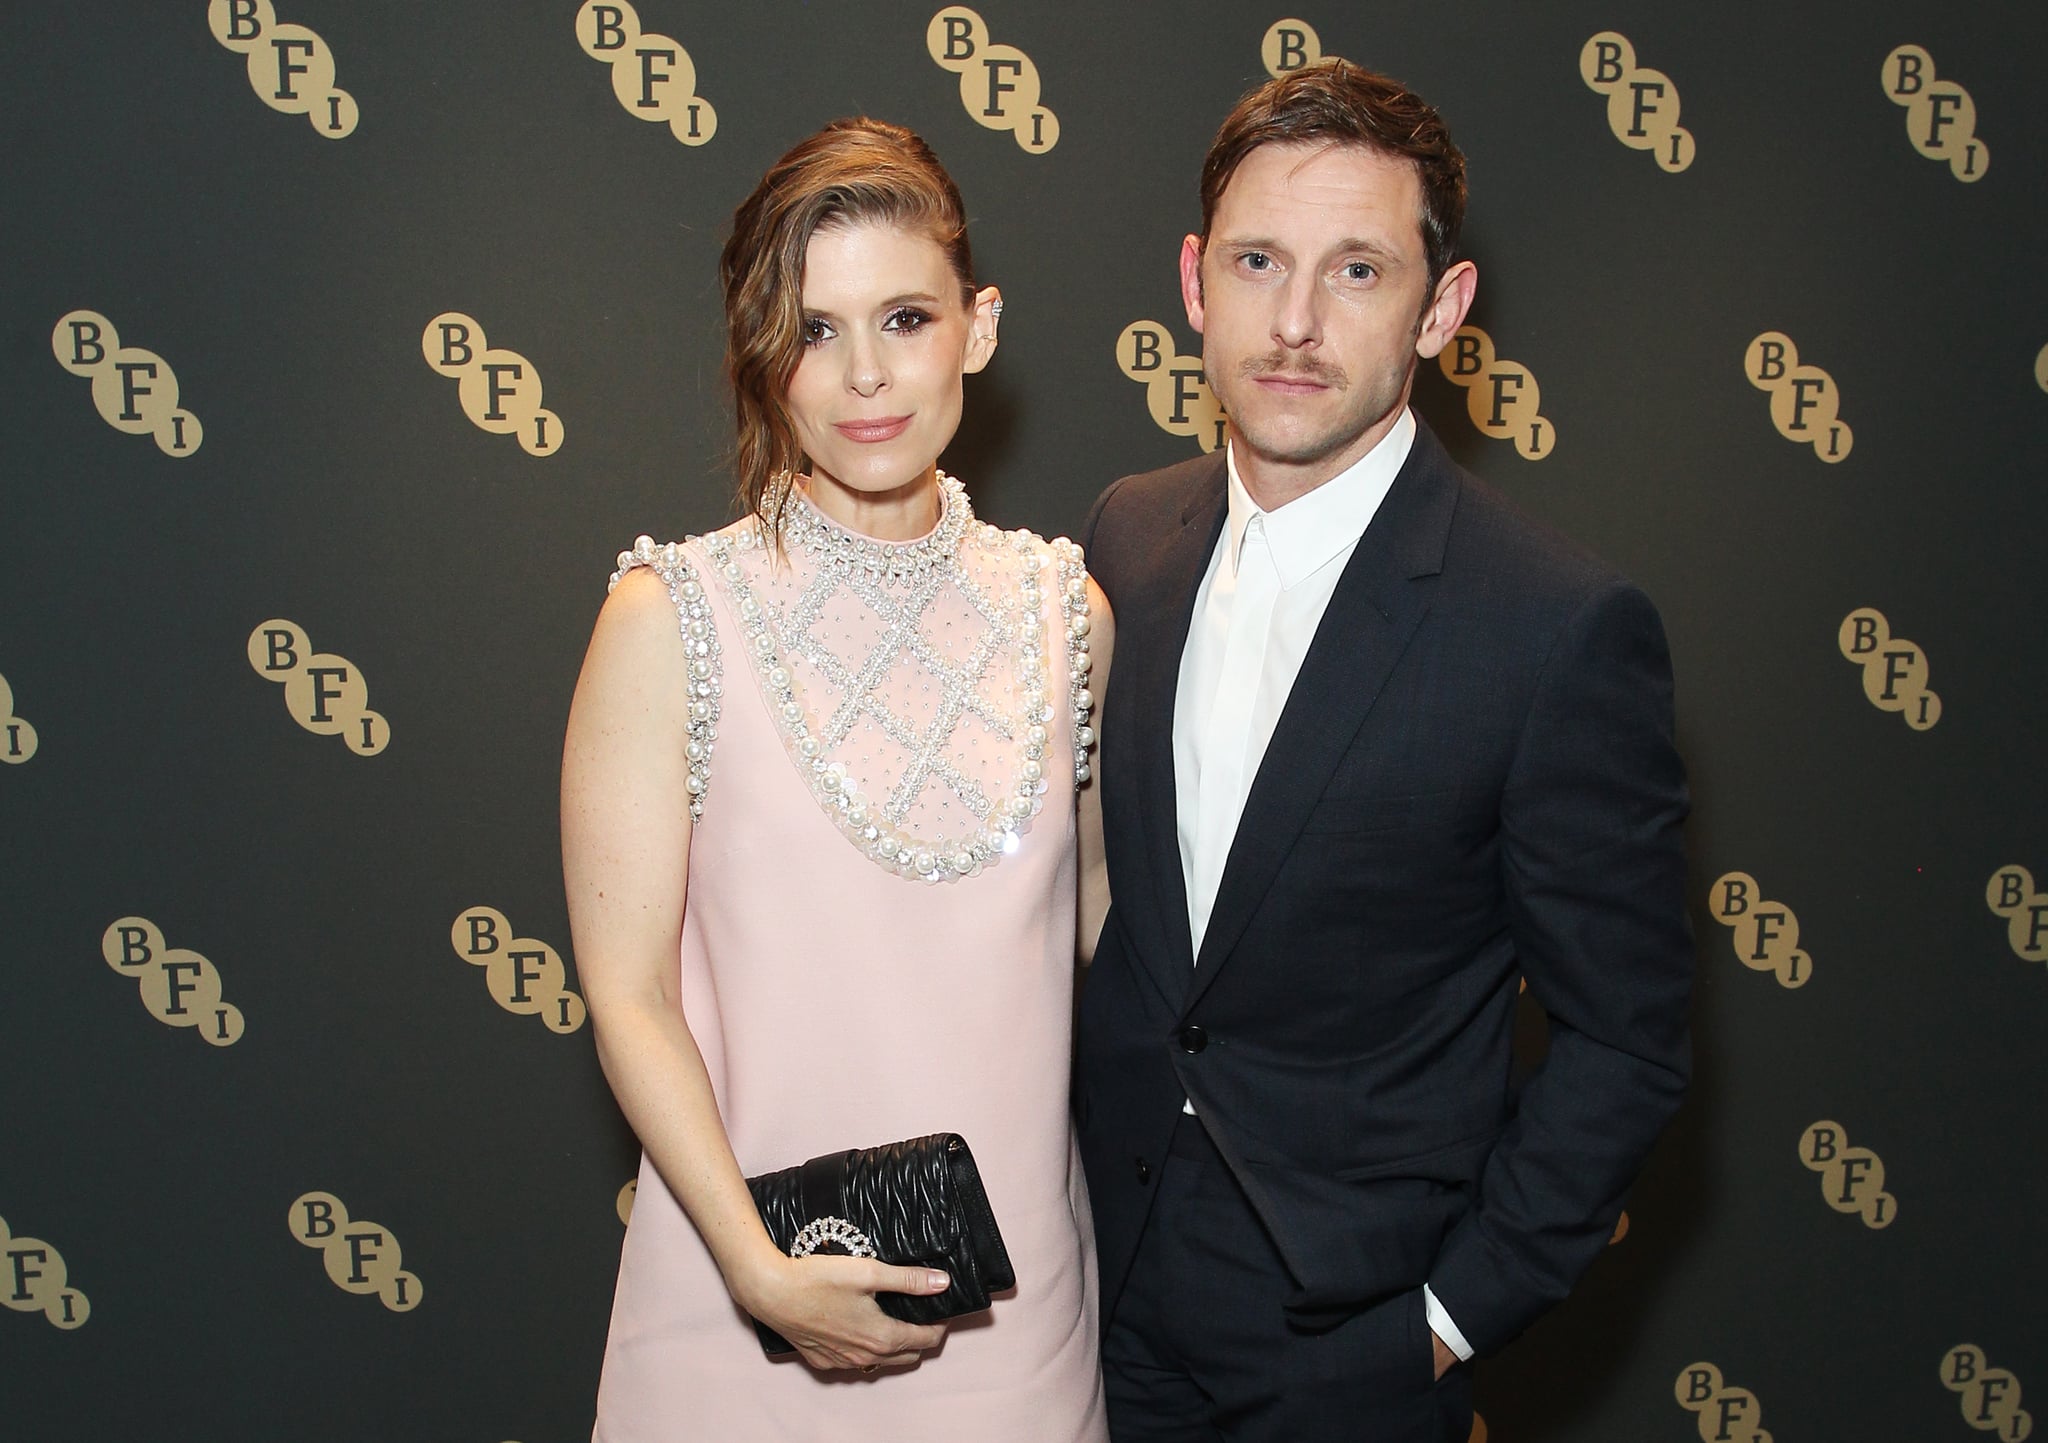 LONDON, ENGLAND - JUNE 28: Kate Mara and Jamie Bell attend the BFI Chair's Dinner awarding BFI Fellowships to James Bond producers Barbara Broccoli and Michael G. Wilson at Claridge's on June 28, 2022 in London, England. (Photo by David M. Benett/Dave Benett/Getty Images)